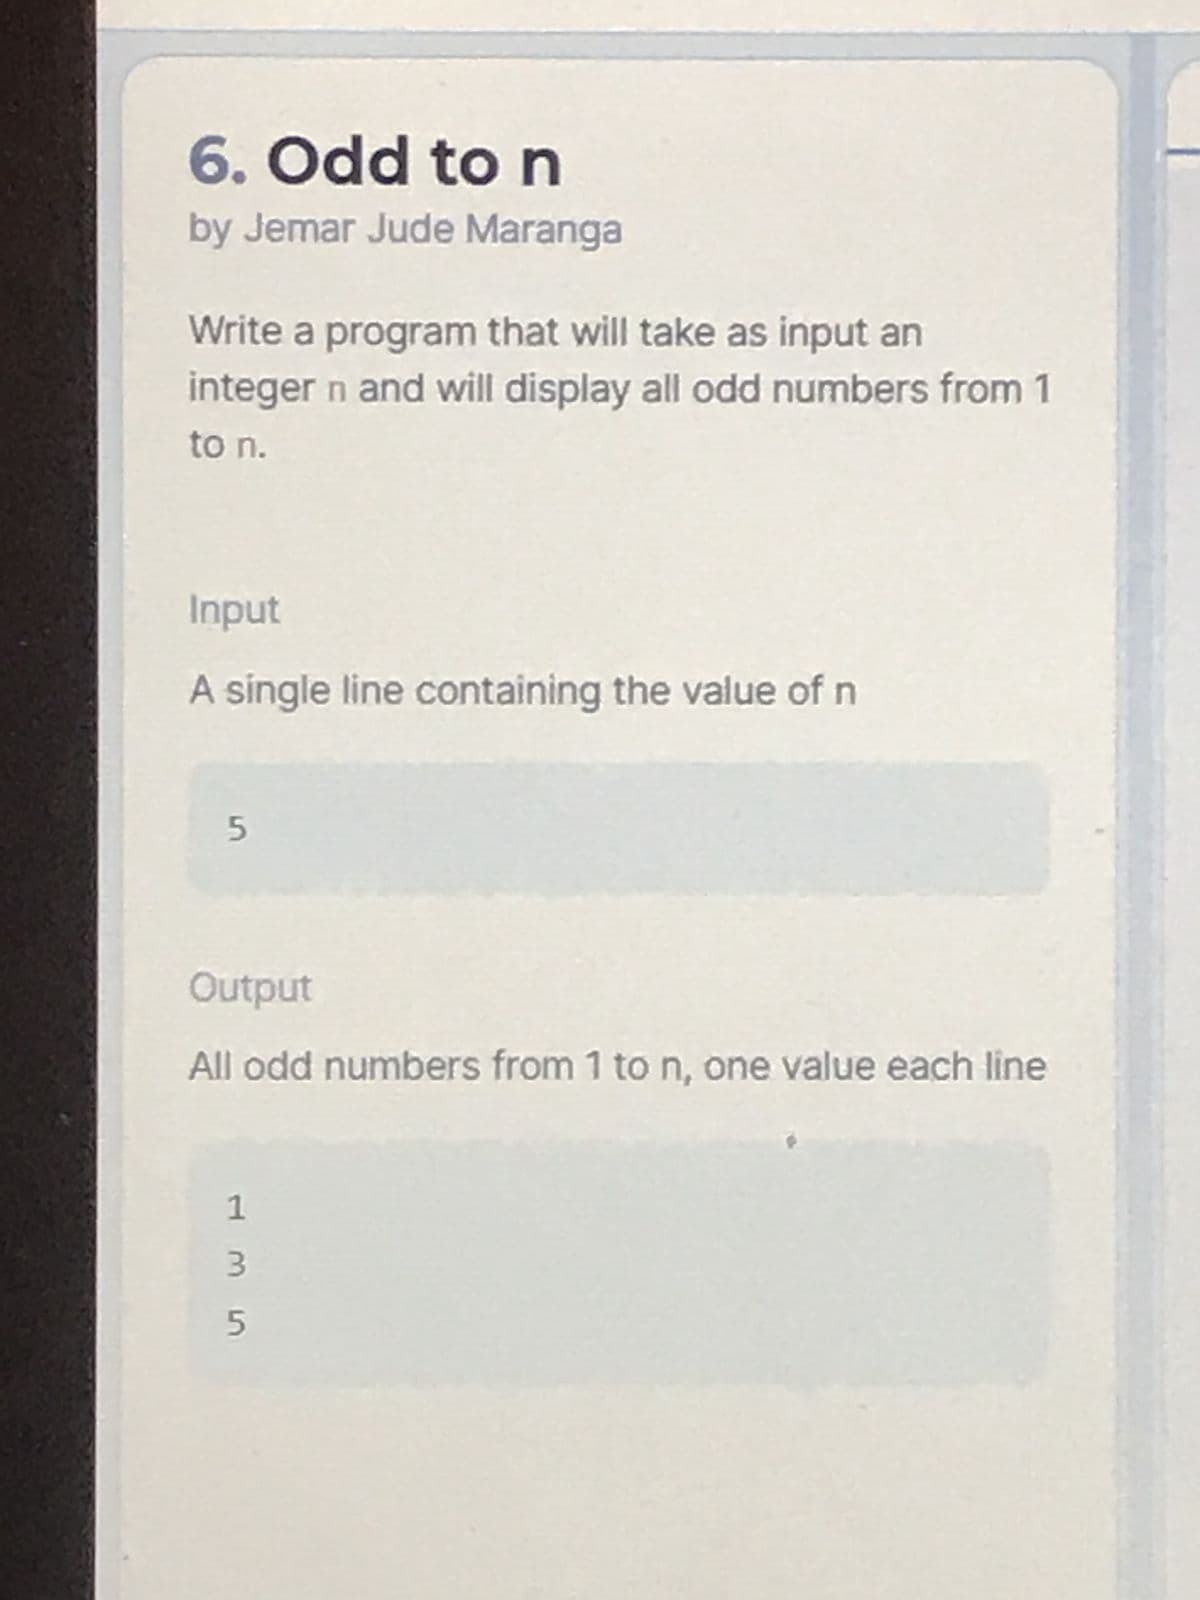 6. Odd to n
by Jemar Jude Maranga
Write a program that will take as input an
integer n and will display all odd numbers from 1
to n.
Input
A single line containing the value of n
5
Output
All odd numbers from 1 to n, one value each line
1
3
5